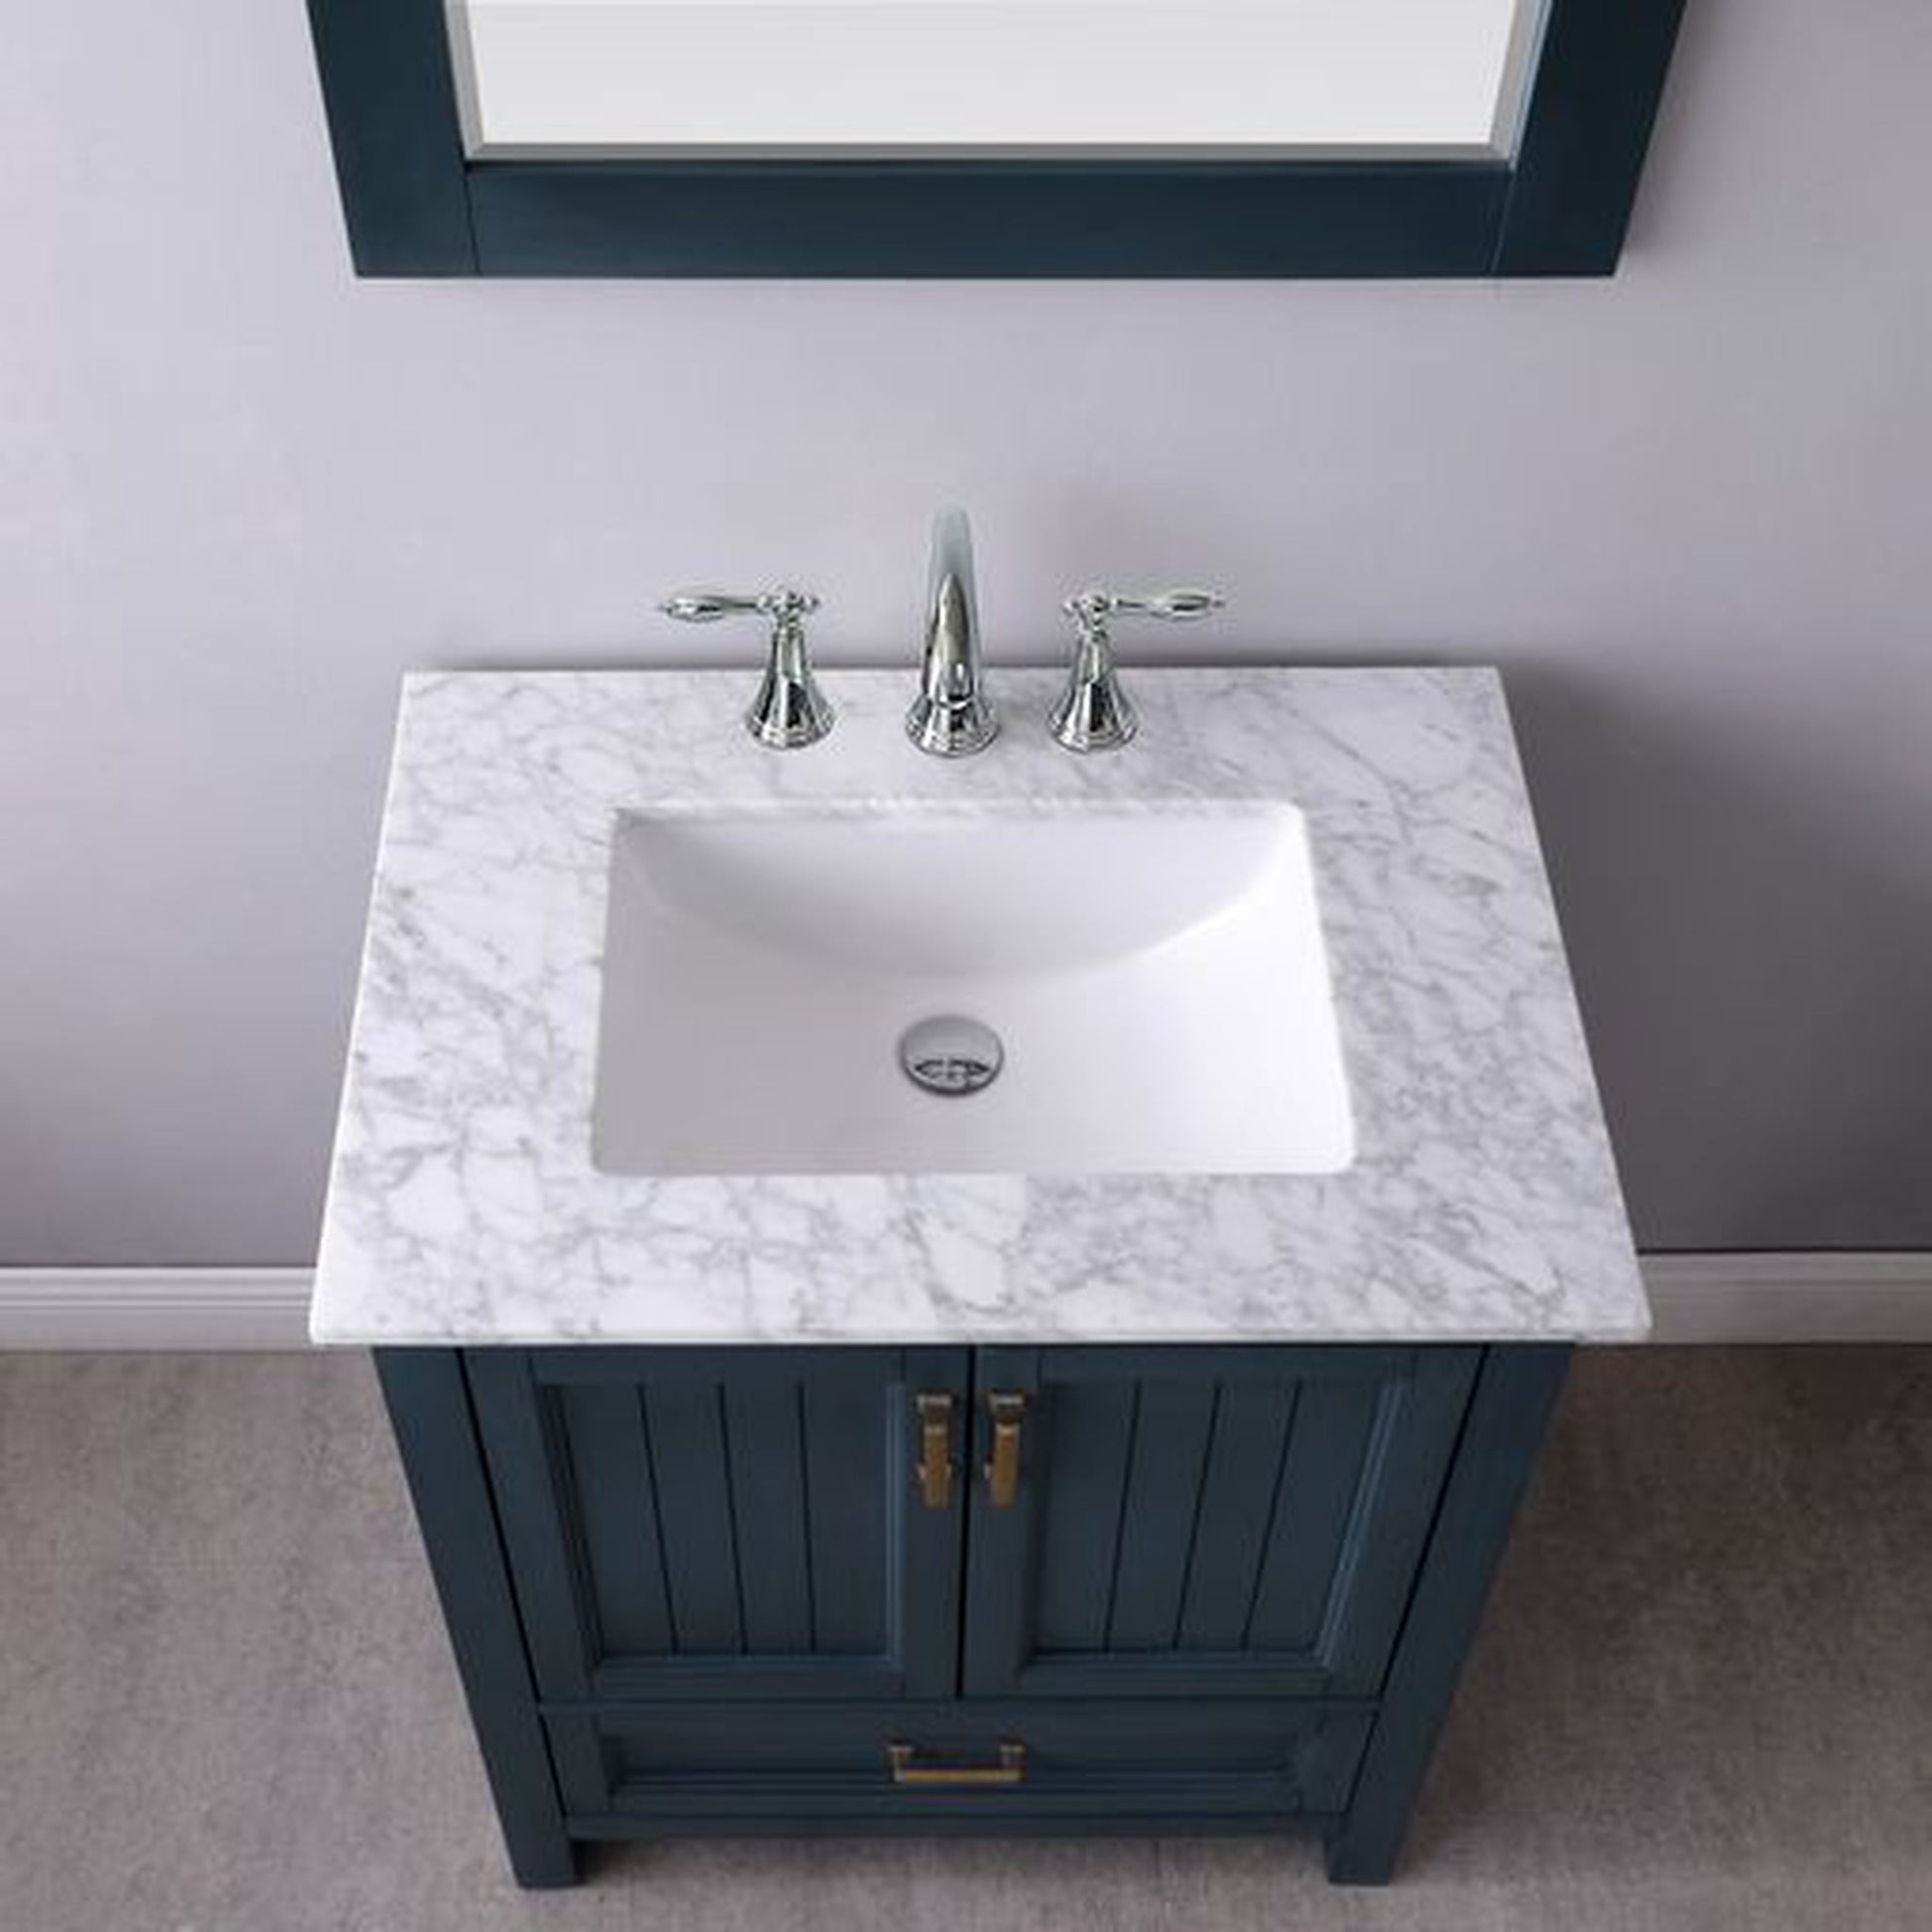 Altair Isla 30" Single Classic Blue Freestanding Bathroom Vanity Set With Mirror, Natural Carrara White Marble Top, Rectangular Undermount Ceramic Sink, and Overflow